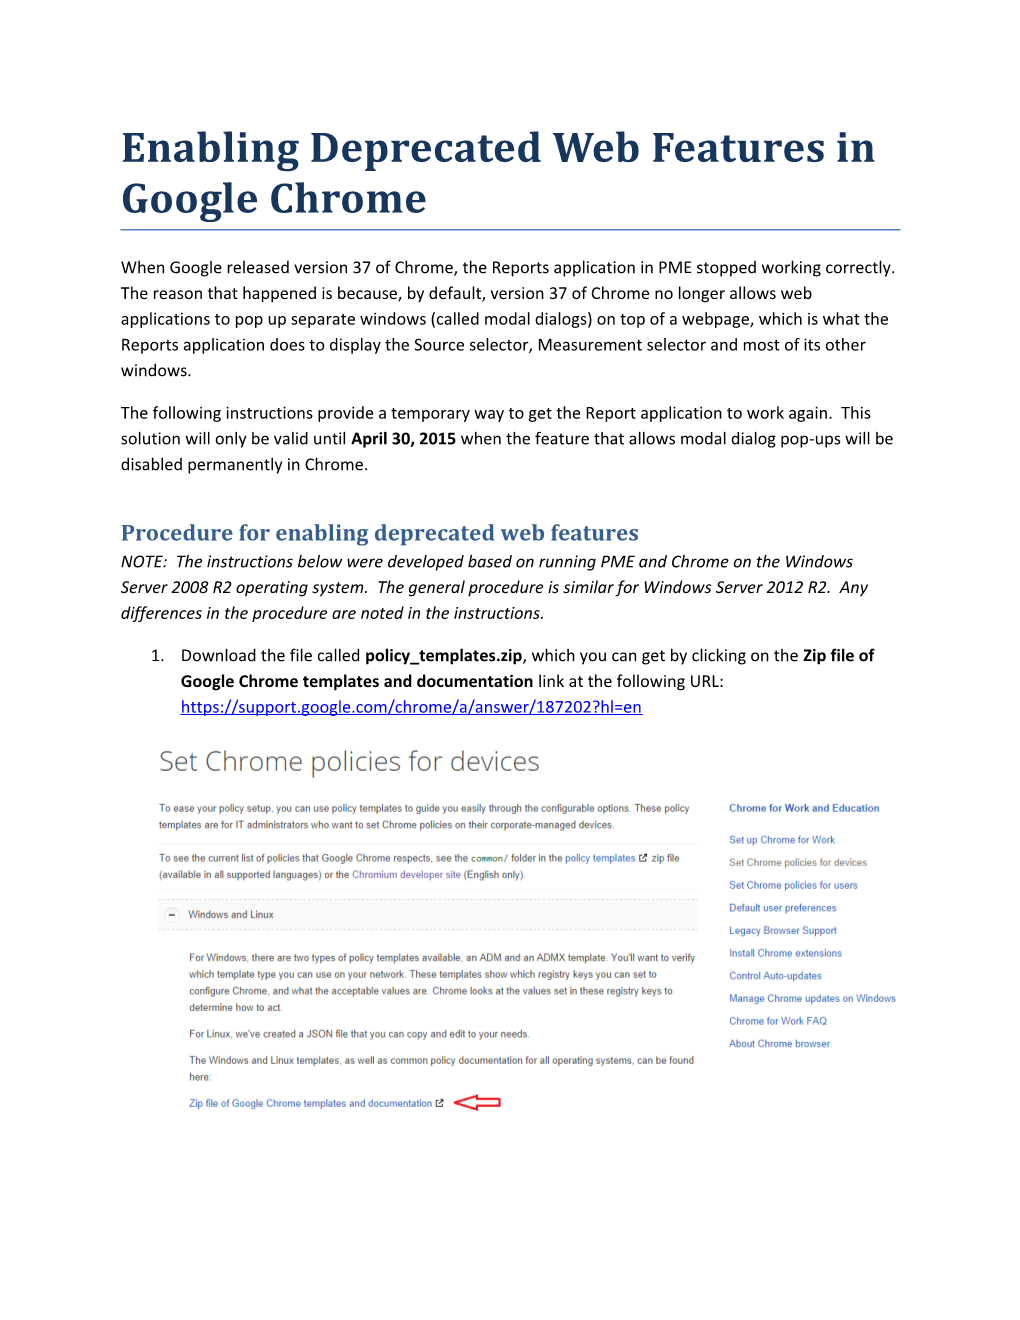 Enabling Deprecated Web Features in Google Chrome